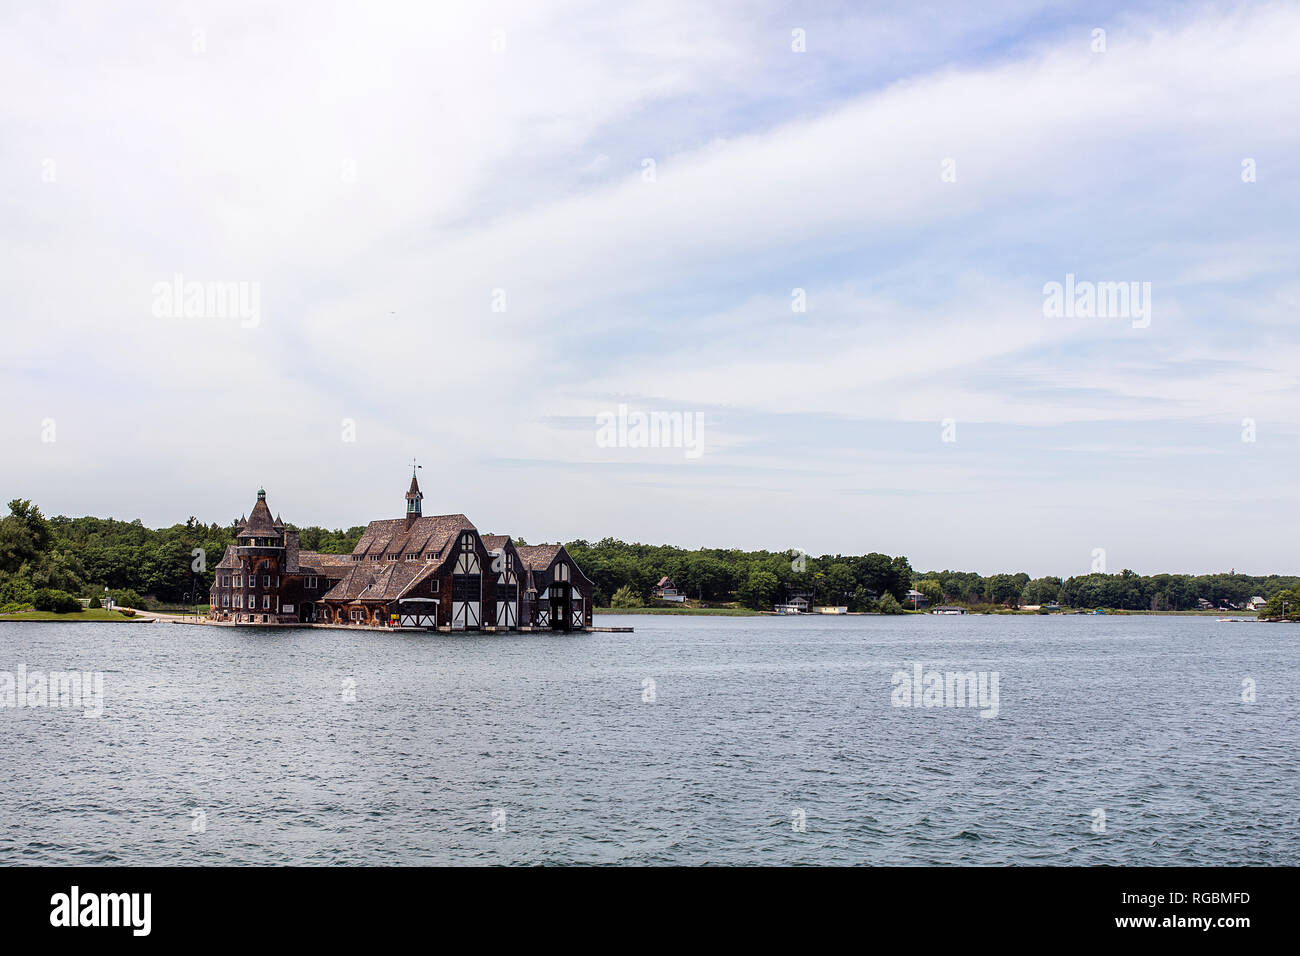 The Thousand Islands Region, Ontario, Canada, June 17, 2018: Boldt Yacht House of The Boldt Castle located on Heart Island Stock Photo